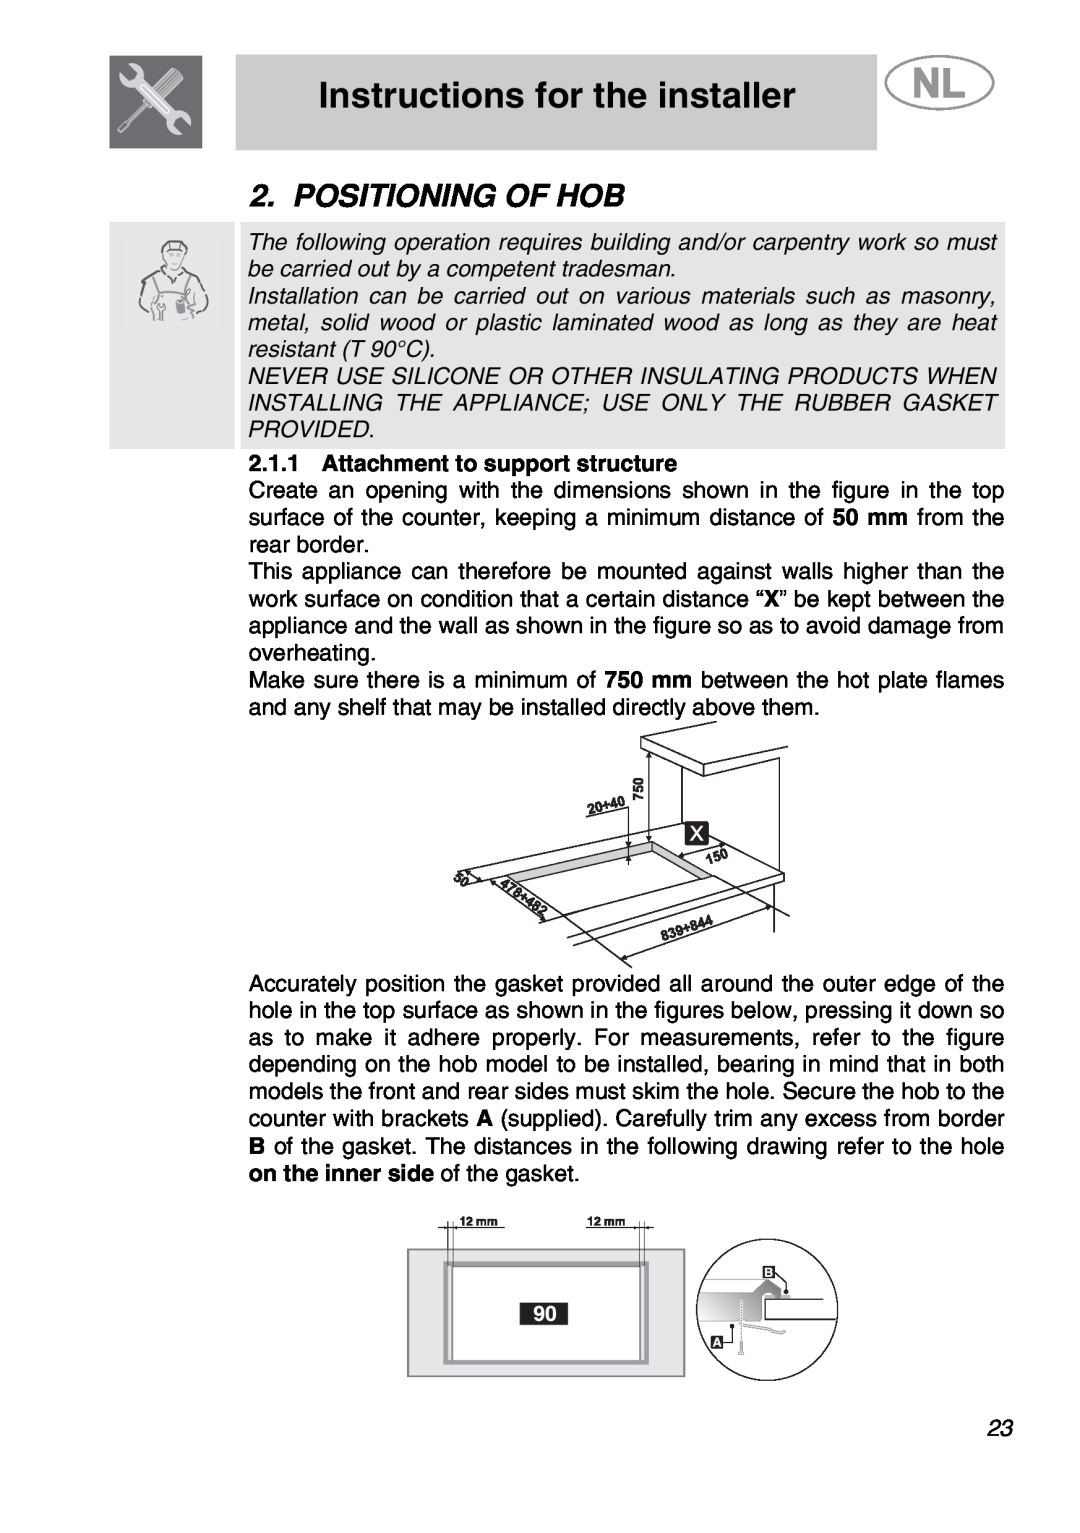 Smeg GKCO955, GKC955 manual Instructions for the installer, Positioning Of Hob, Attachment to support structure 